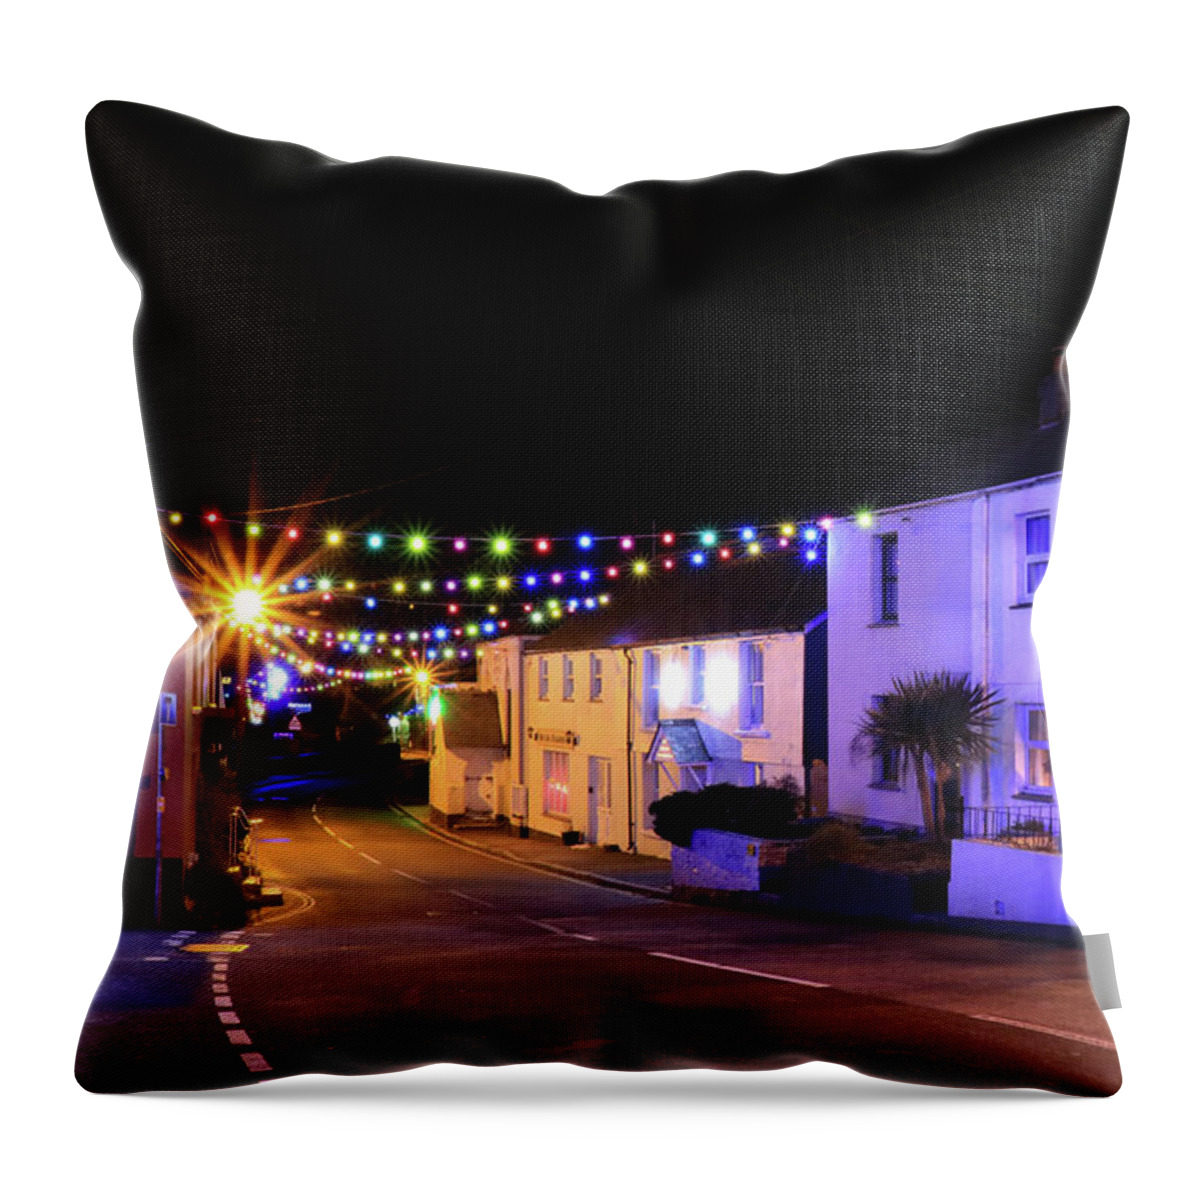 Mylor Bridge Throw Pillow featuring the photograph Mylor Bridge at Christmas by Terri Waters